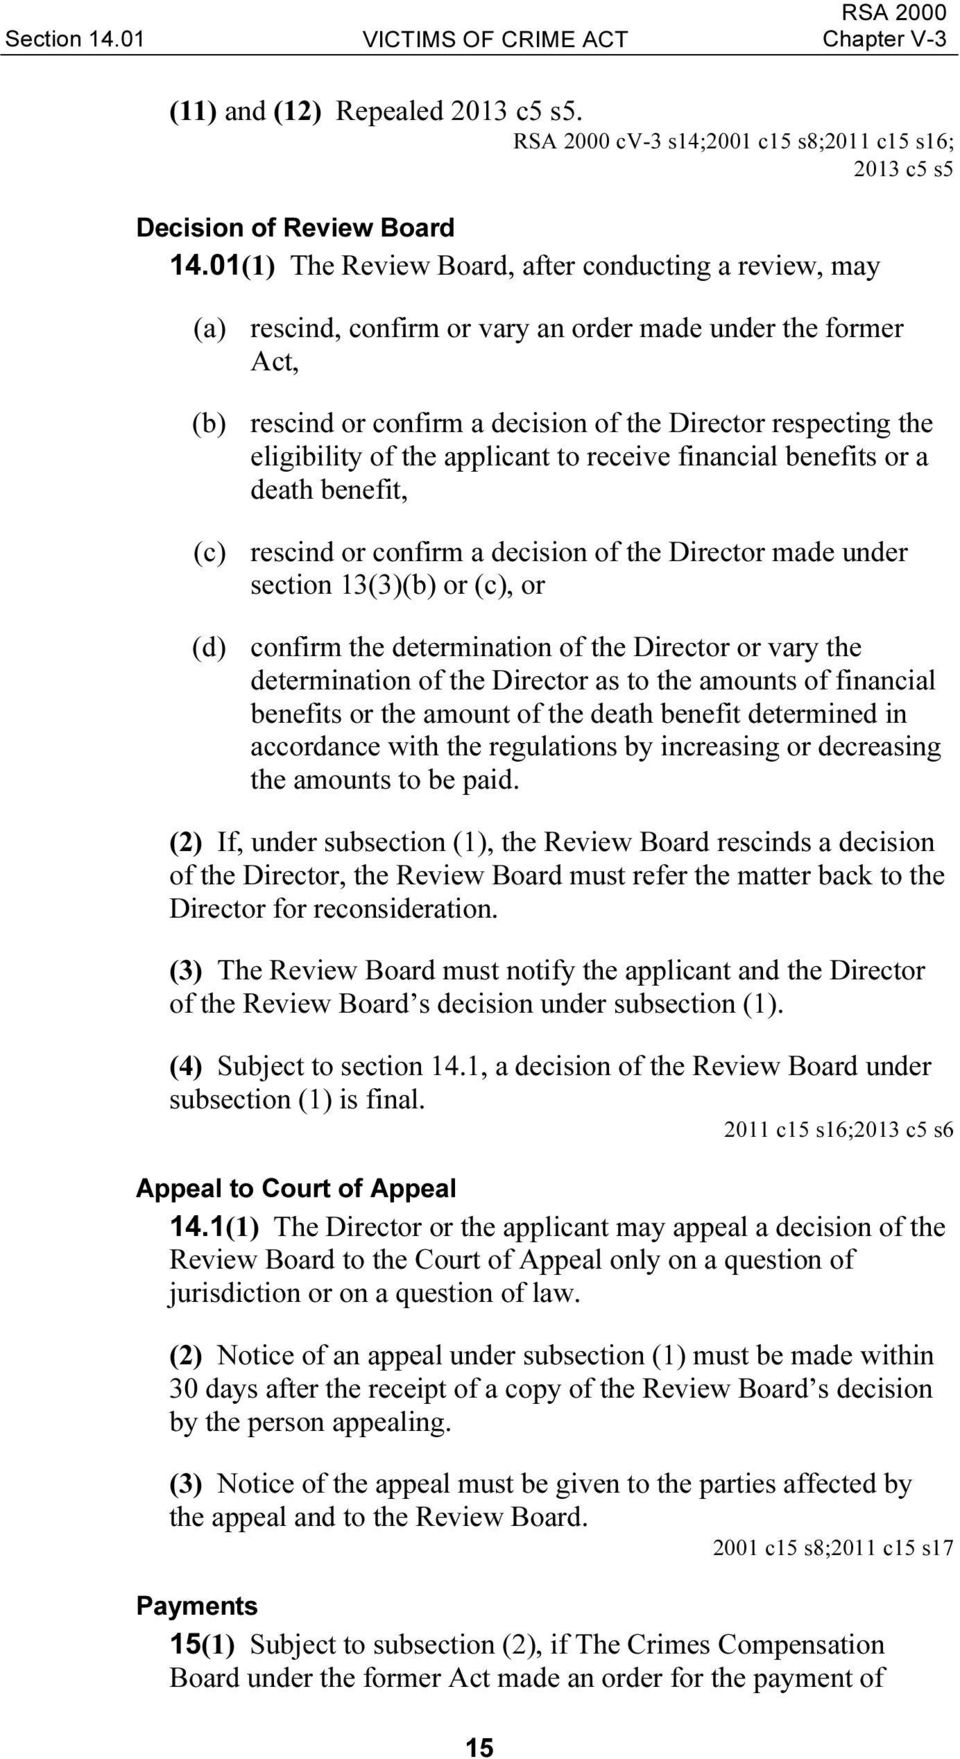 the applicant to receive financial benefits or a death benefit, (c) rescind or confirm a decision of the Director made under section 13(3)(b) or (c), or (d) confirm the determination of the Director